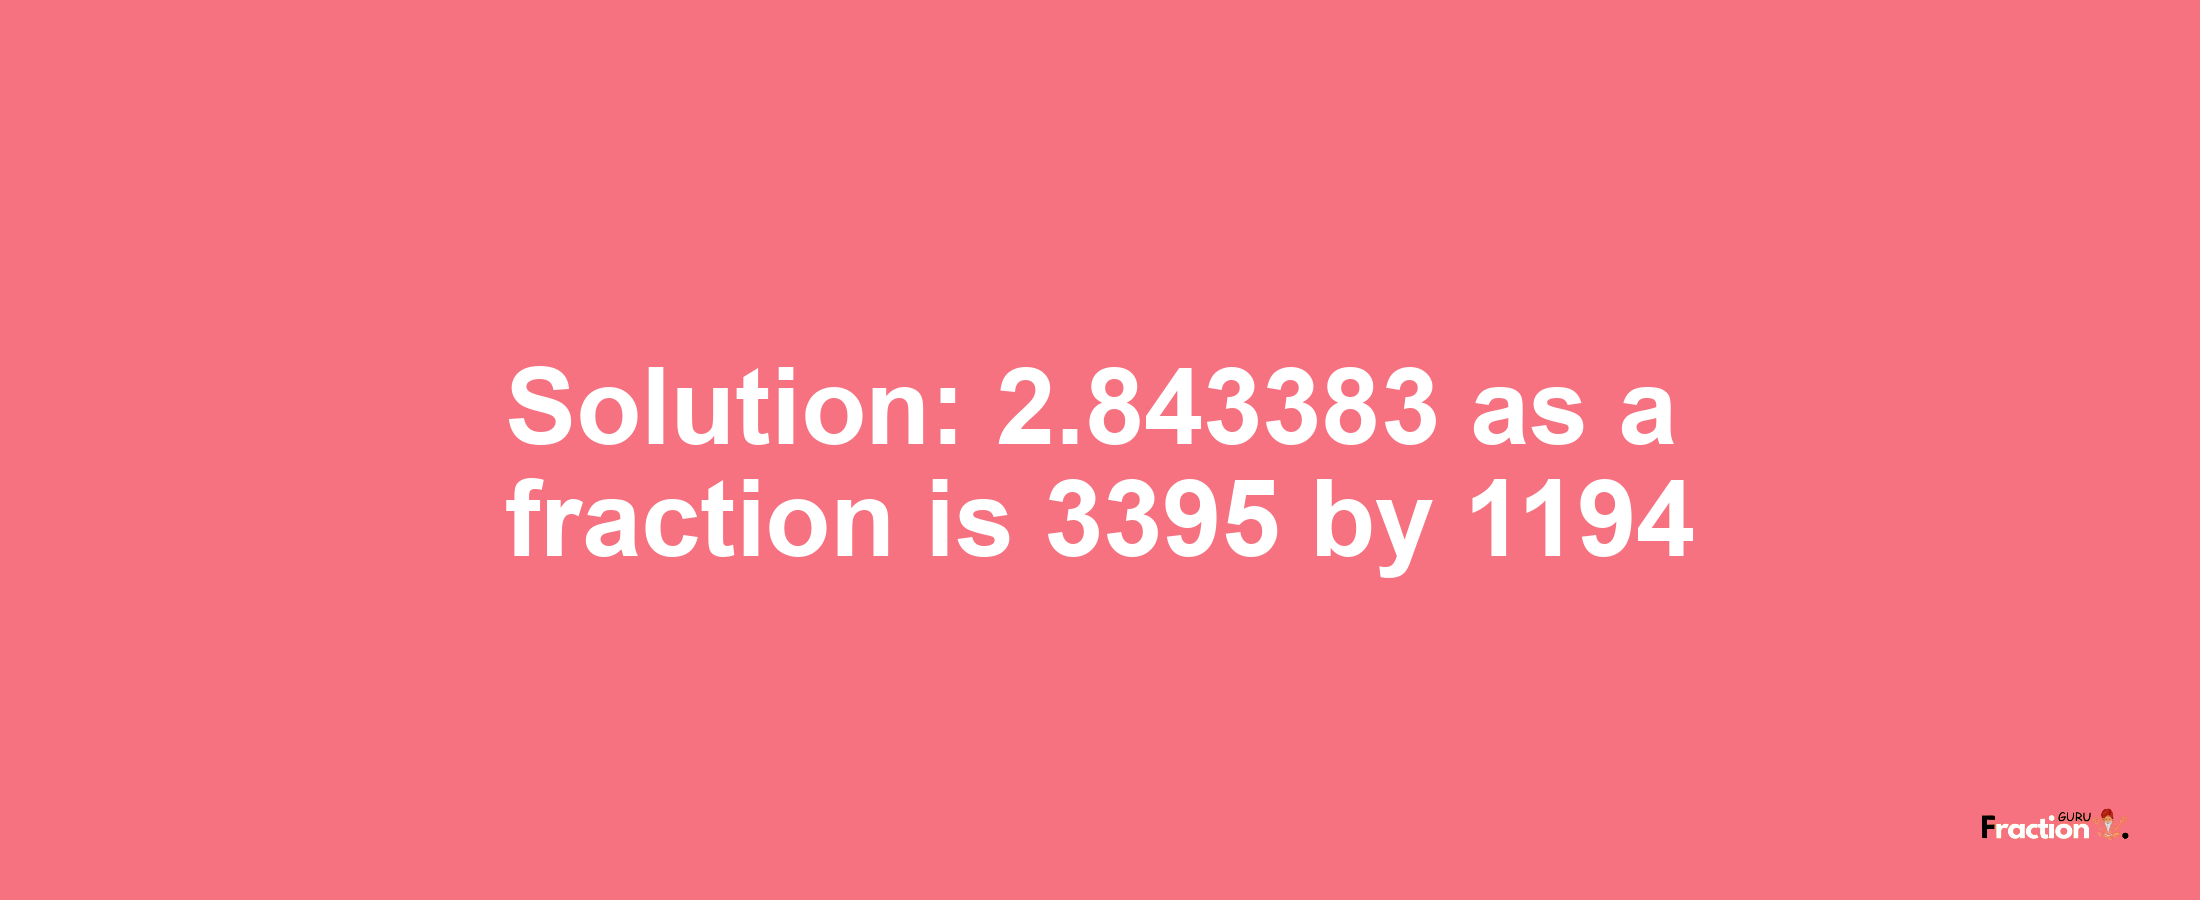 Solution:2.843383 as a fraction is 3395/1194